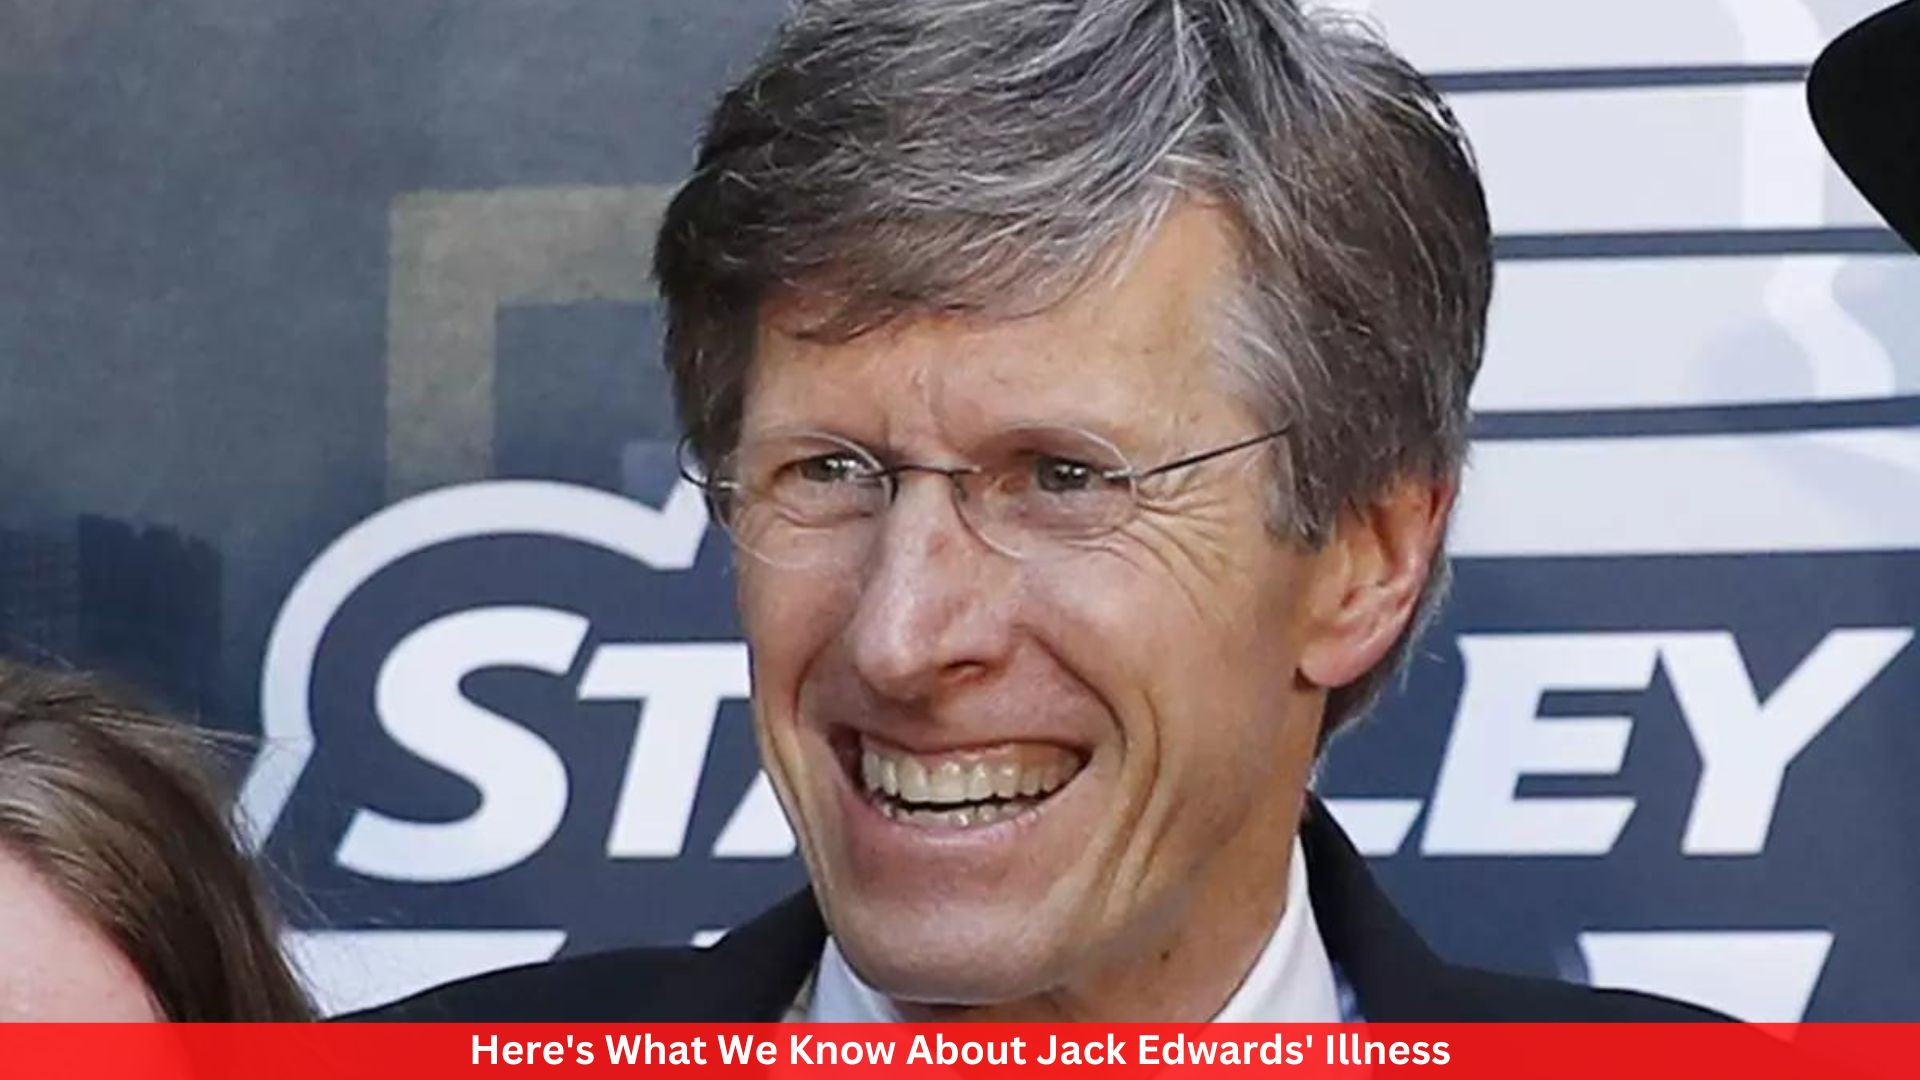 Here's What We Know About Jack Edwards' Illness